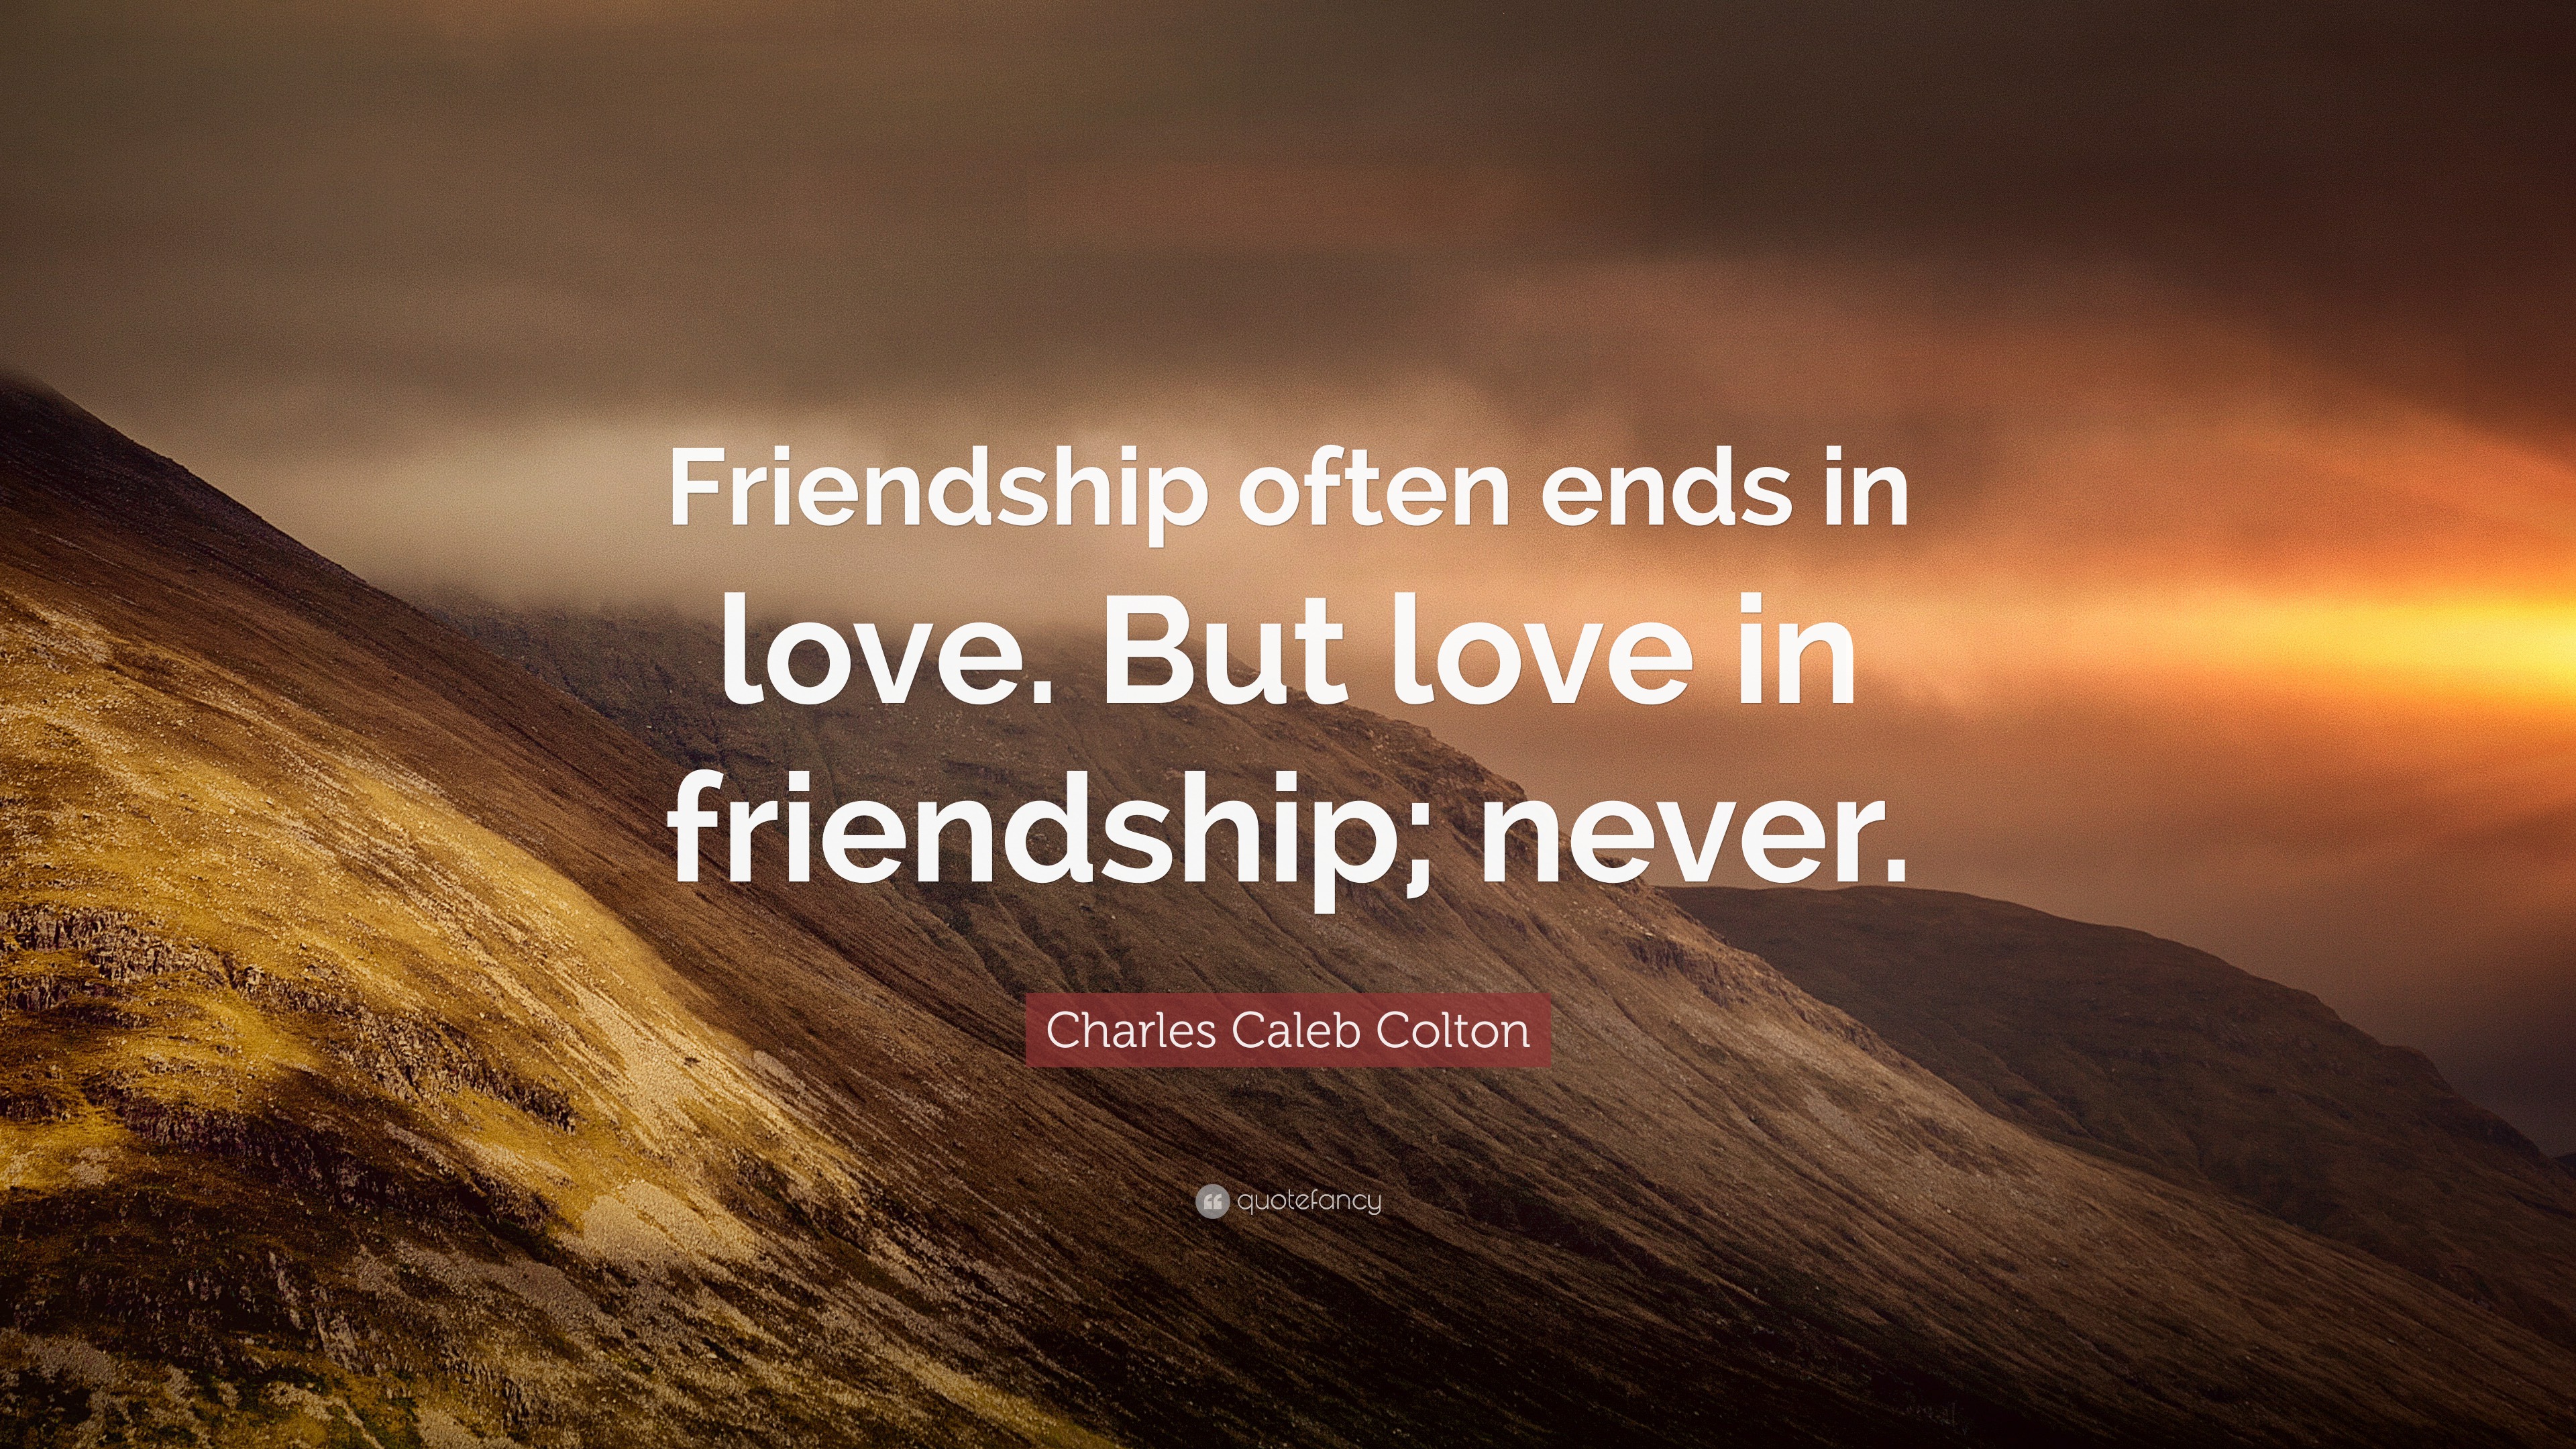 Charles Caleb Colton Quote: “Friendship often ends in love. But love in